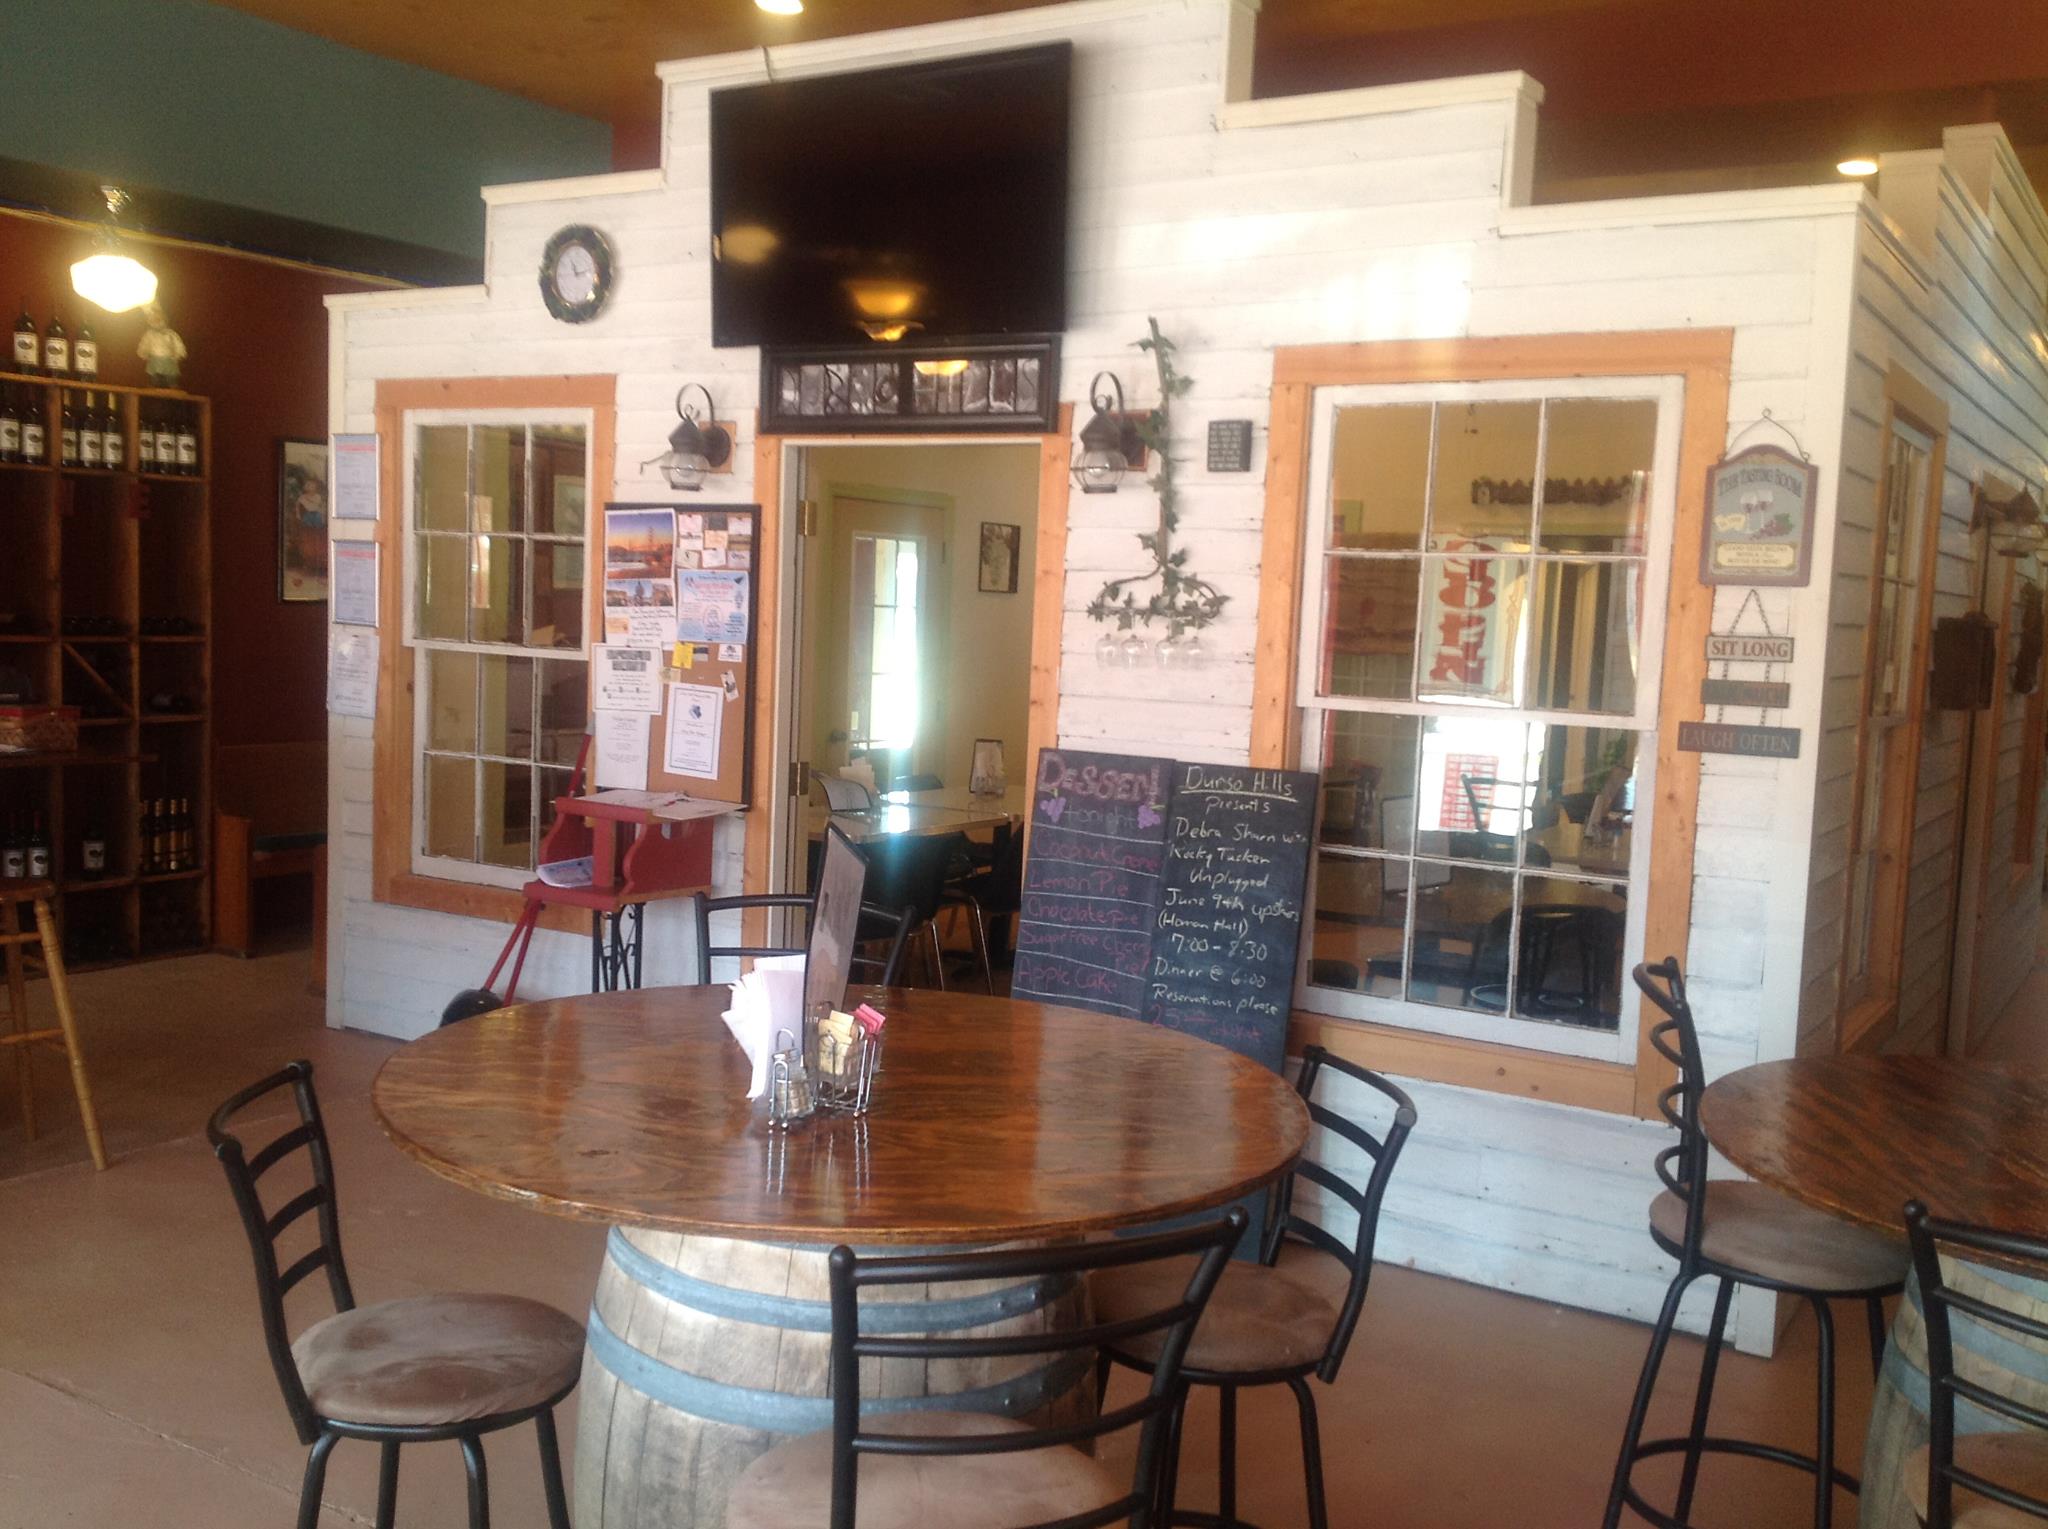 Durso Hills Winery and Bistro- A seating area with a mock store front in the middle.